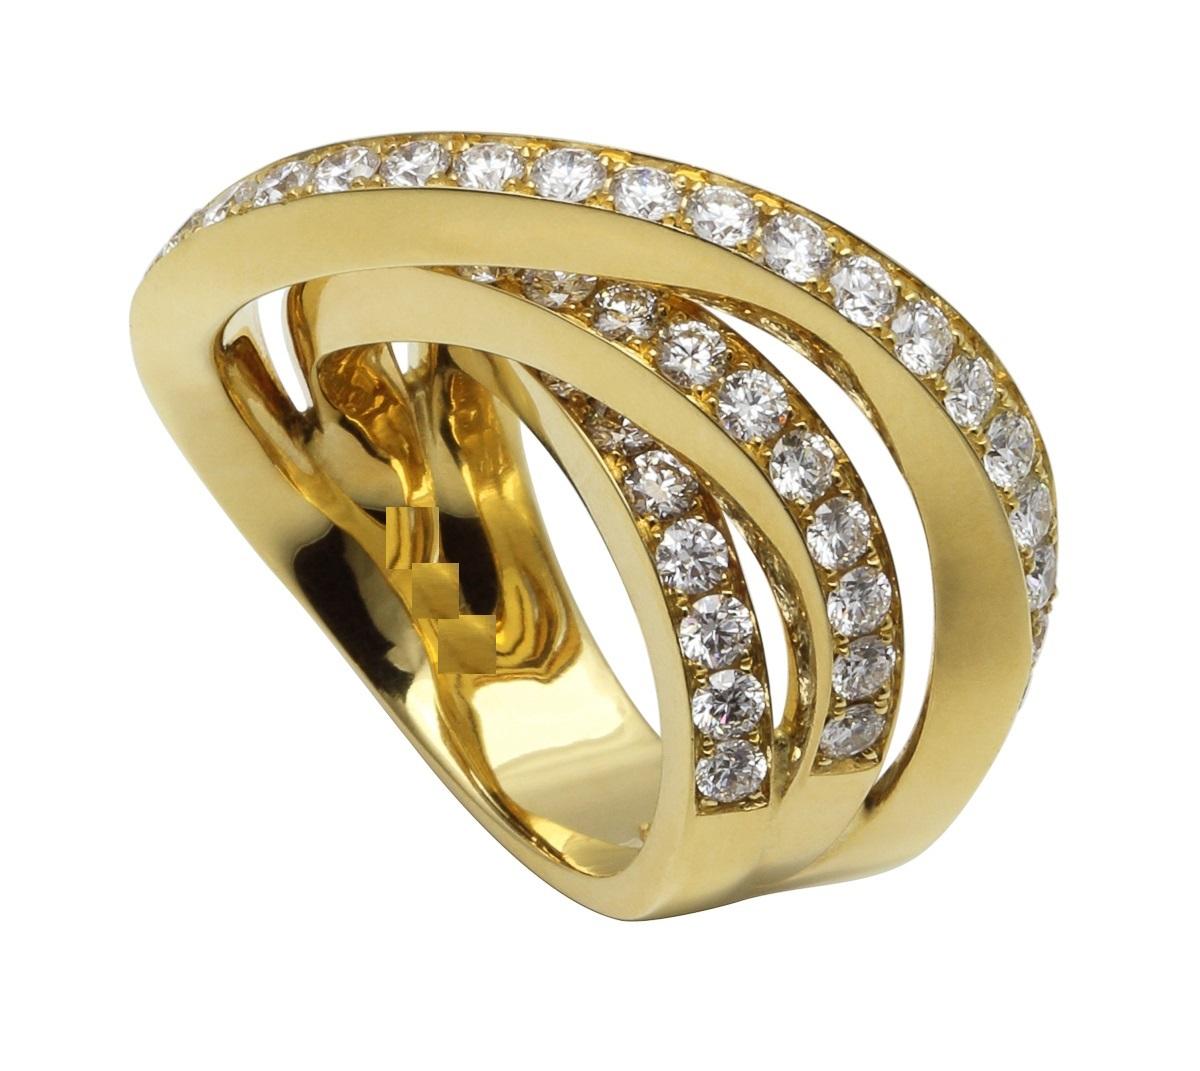 Curved Triple Twist Ring

Diamond Channel Geometric Wave Curve Statement Unique 18 Karat Yellow Gold Ring

The winning swing and the architectural purity are the relevant ingredients for these rings of contemporary inspiration. Not only a matter of